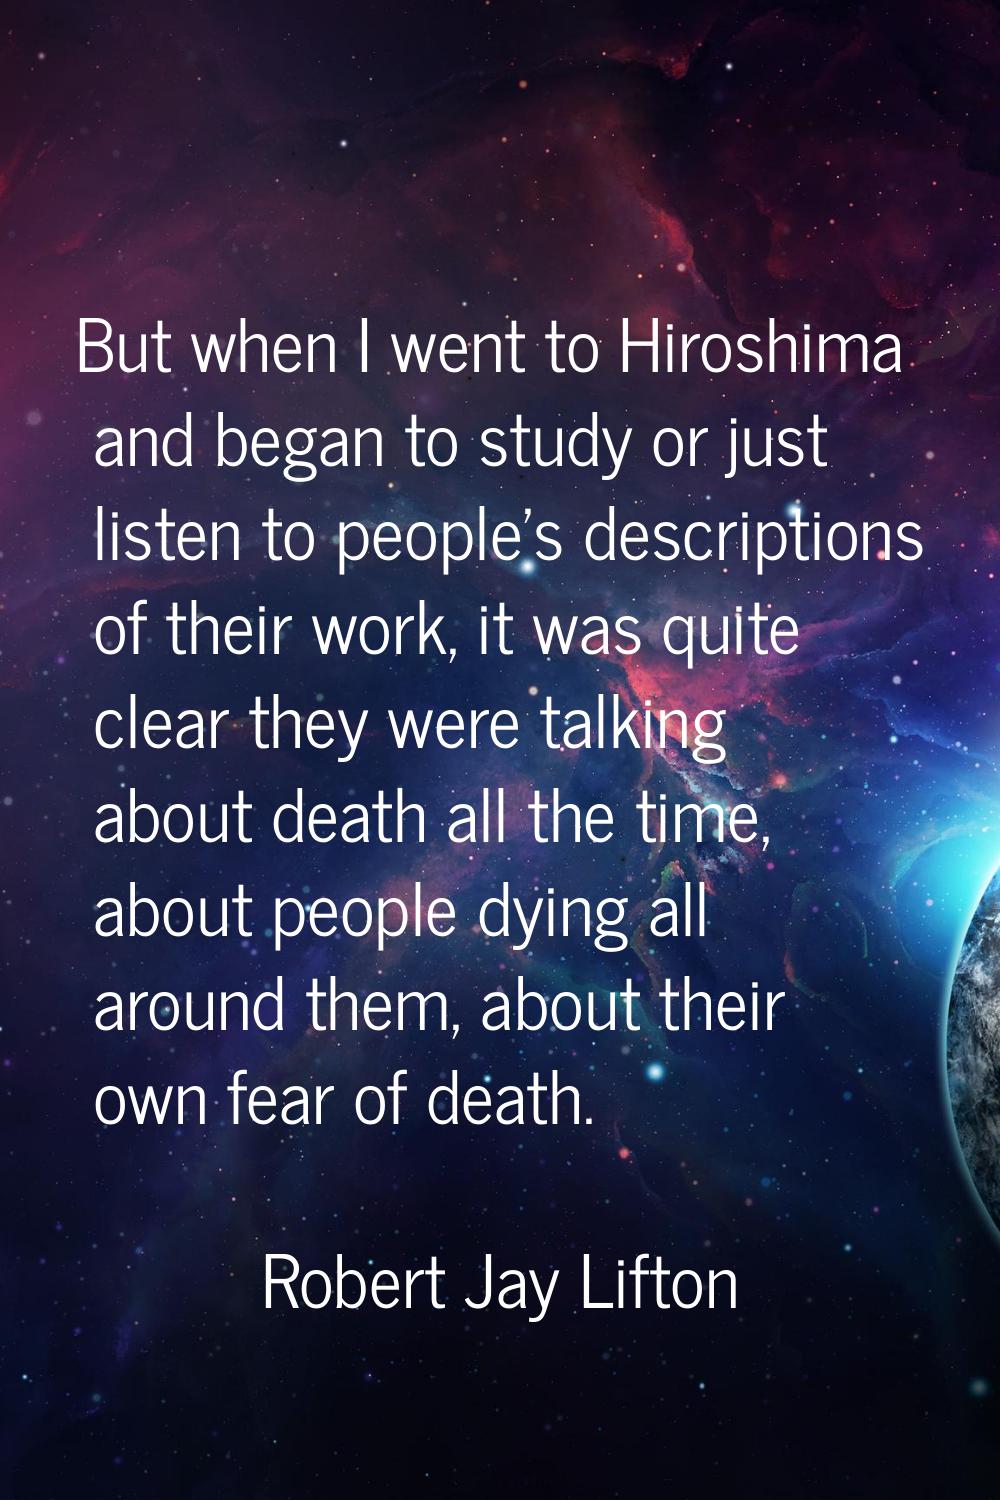 But when I went to Hiroshima and began to study or just listen to people's descriptions of their wo